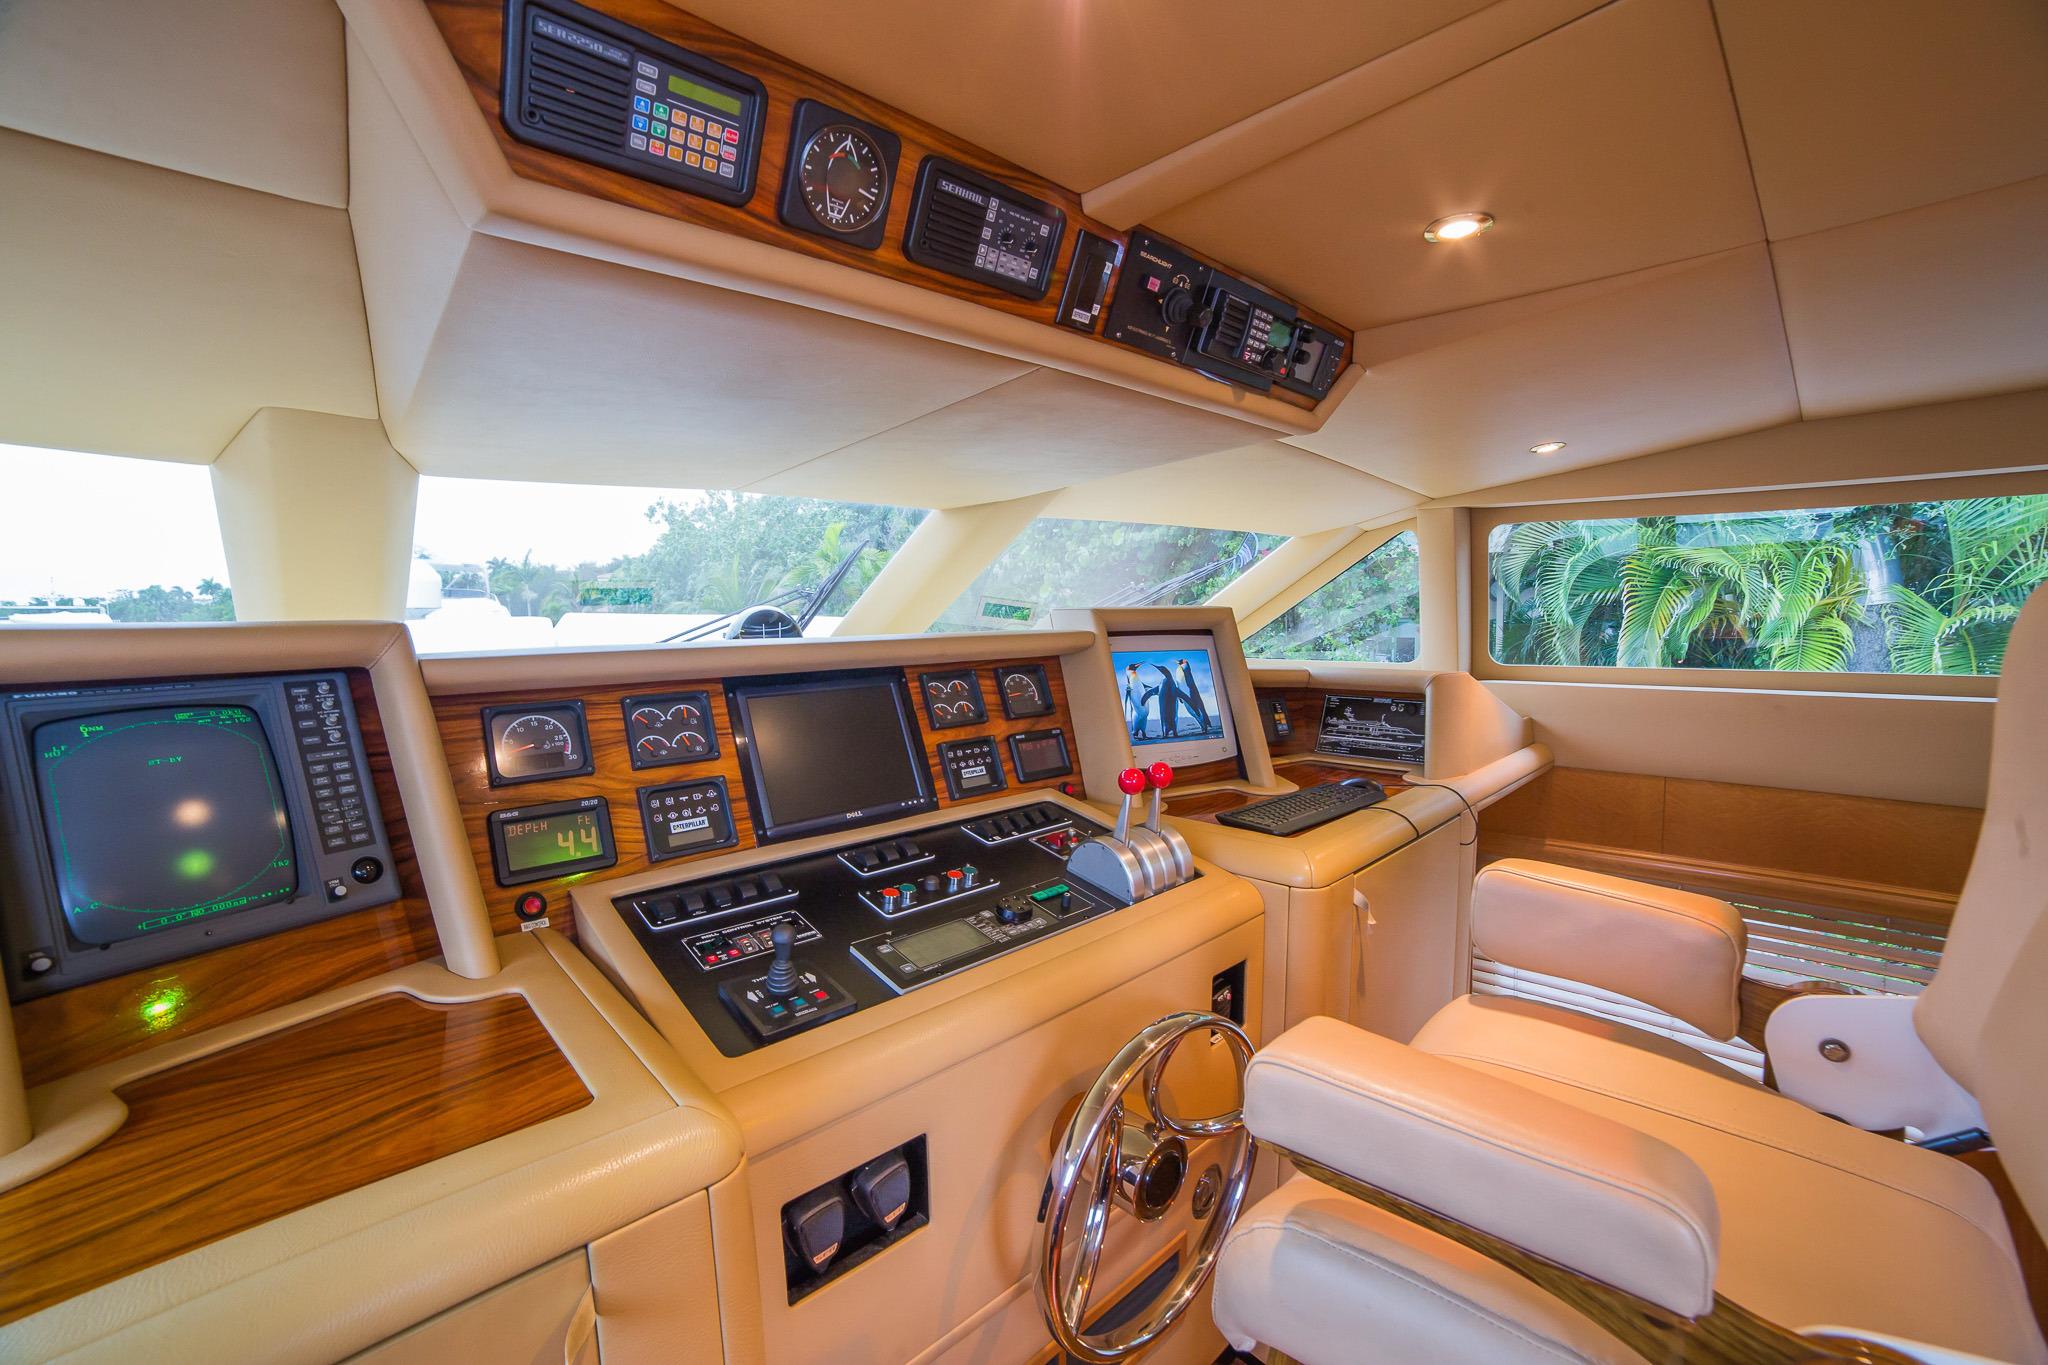 pilot house image gallery – luxury yacht browser by